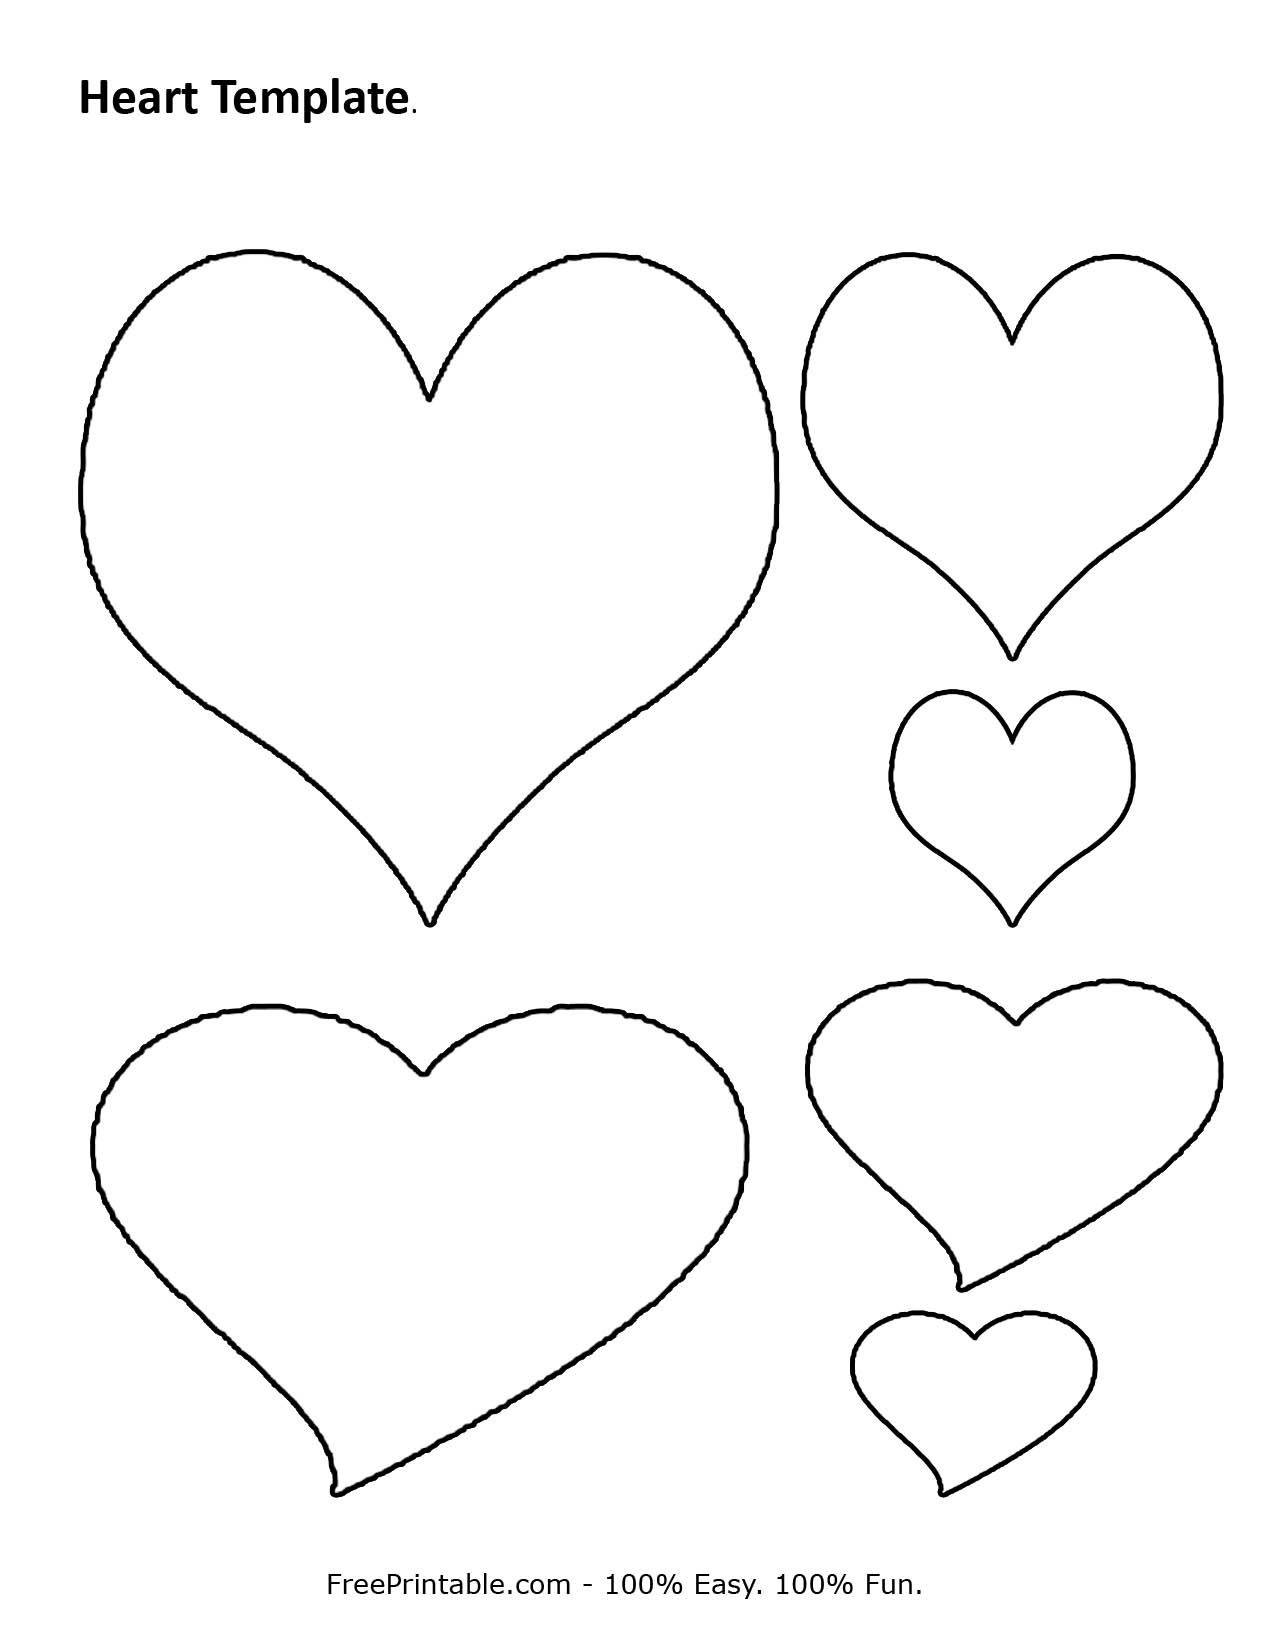 Free Printable Heart Template | Cupid Has A Heart On | Heart - Free Printable Heart Designs